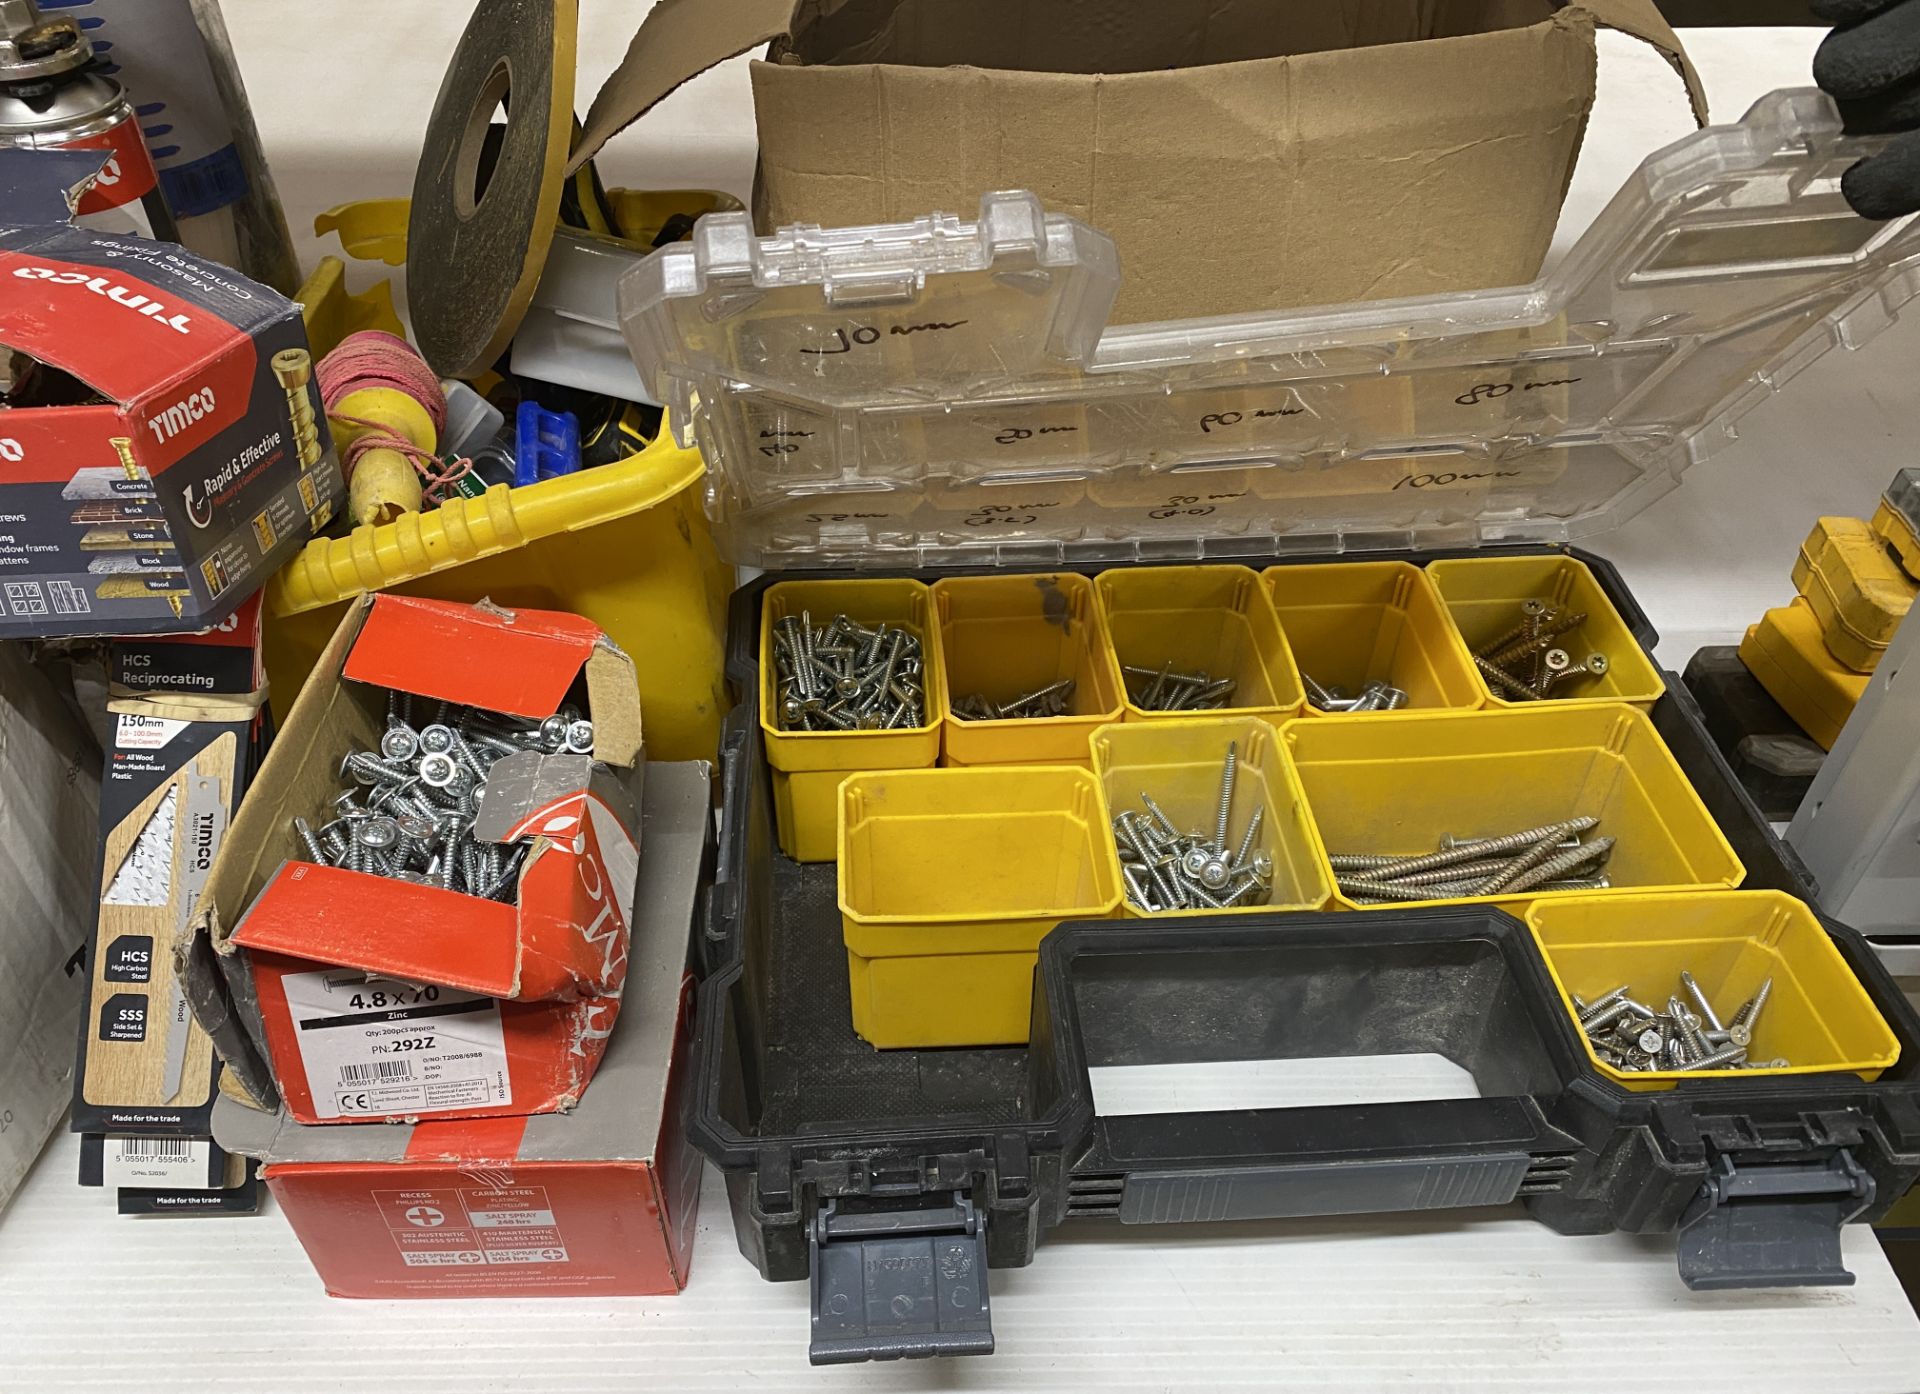 2 x Stanley Fatmax storage boxes and contents - nails and screws, tubes silirub silicone, - Image 3 of 3